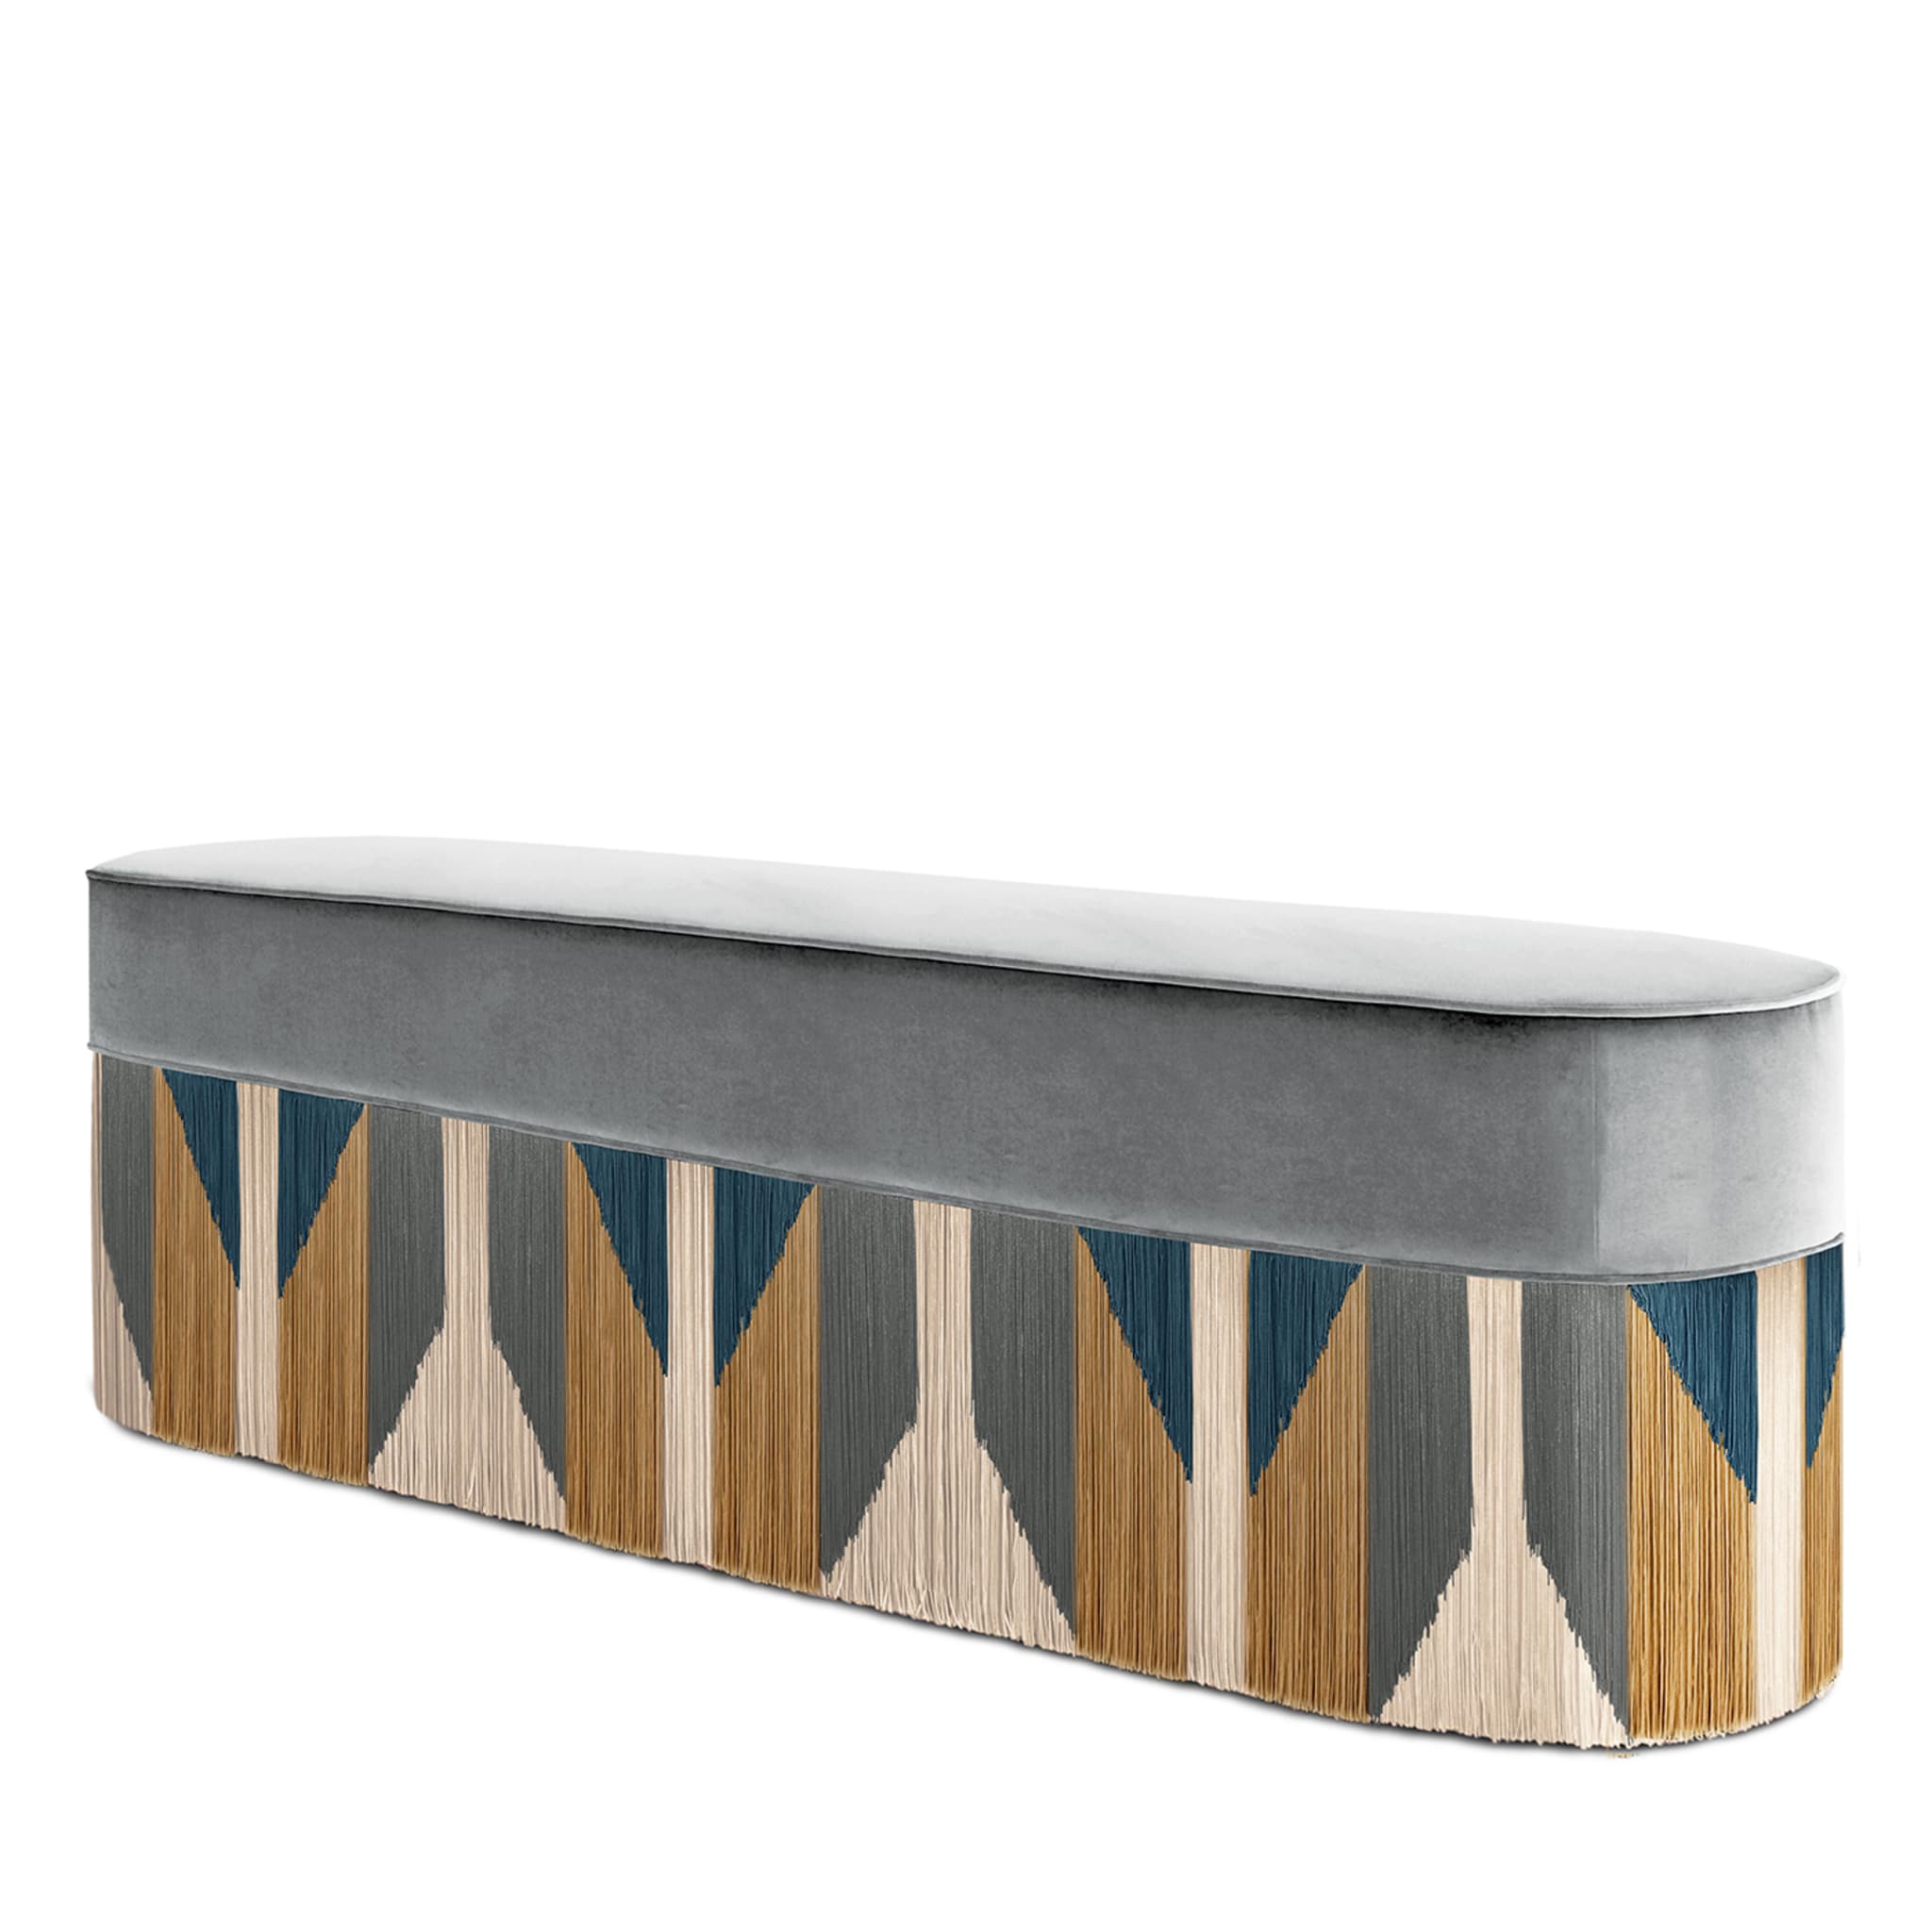 Couture Tribe Polychrome Bench #1 - Alternative view 2